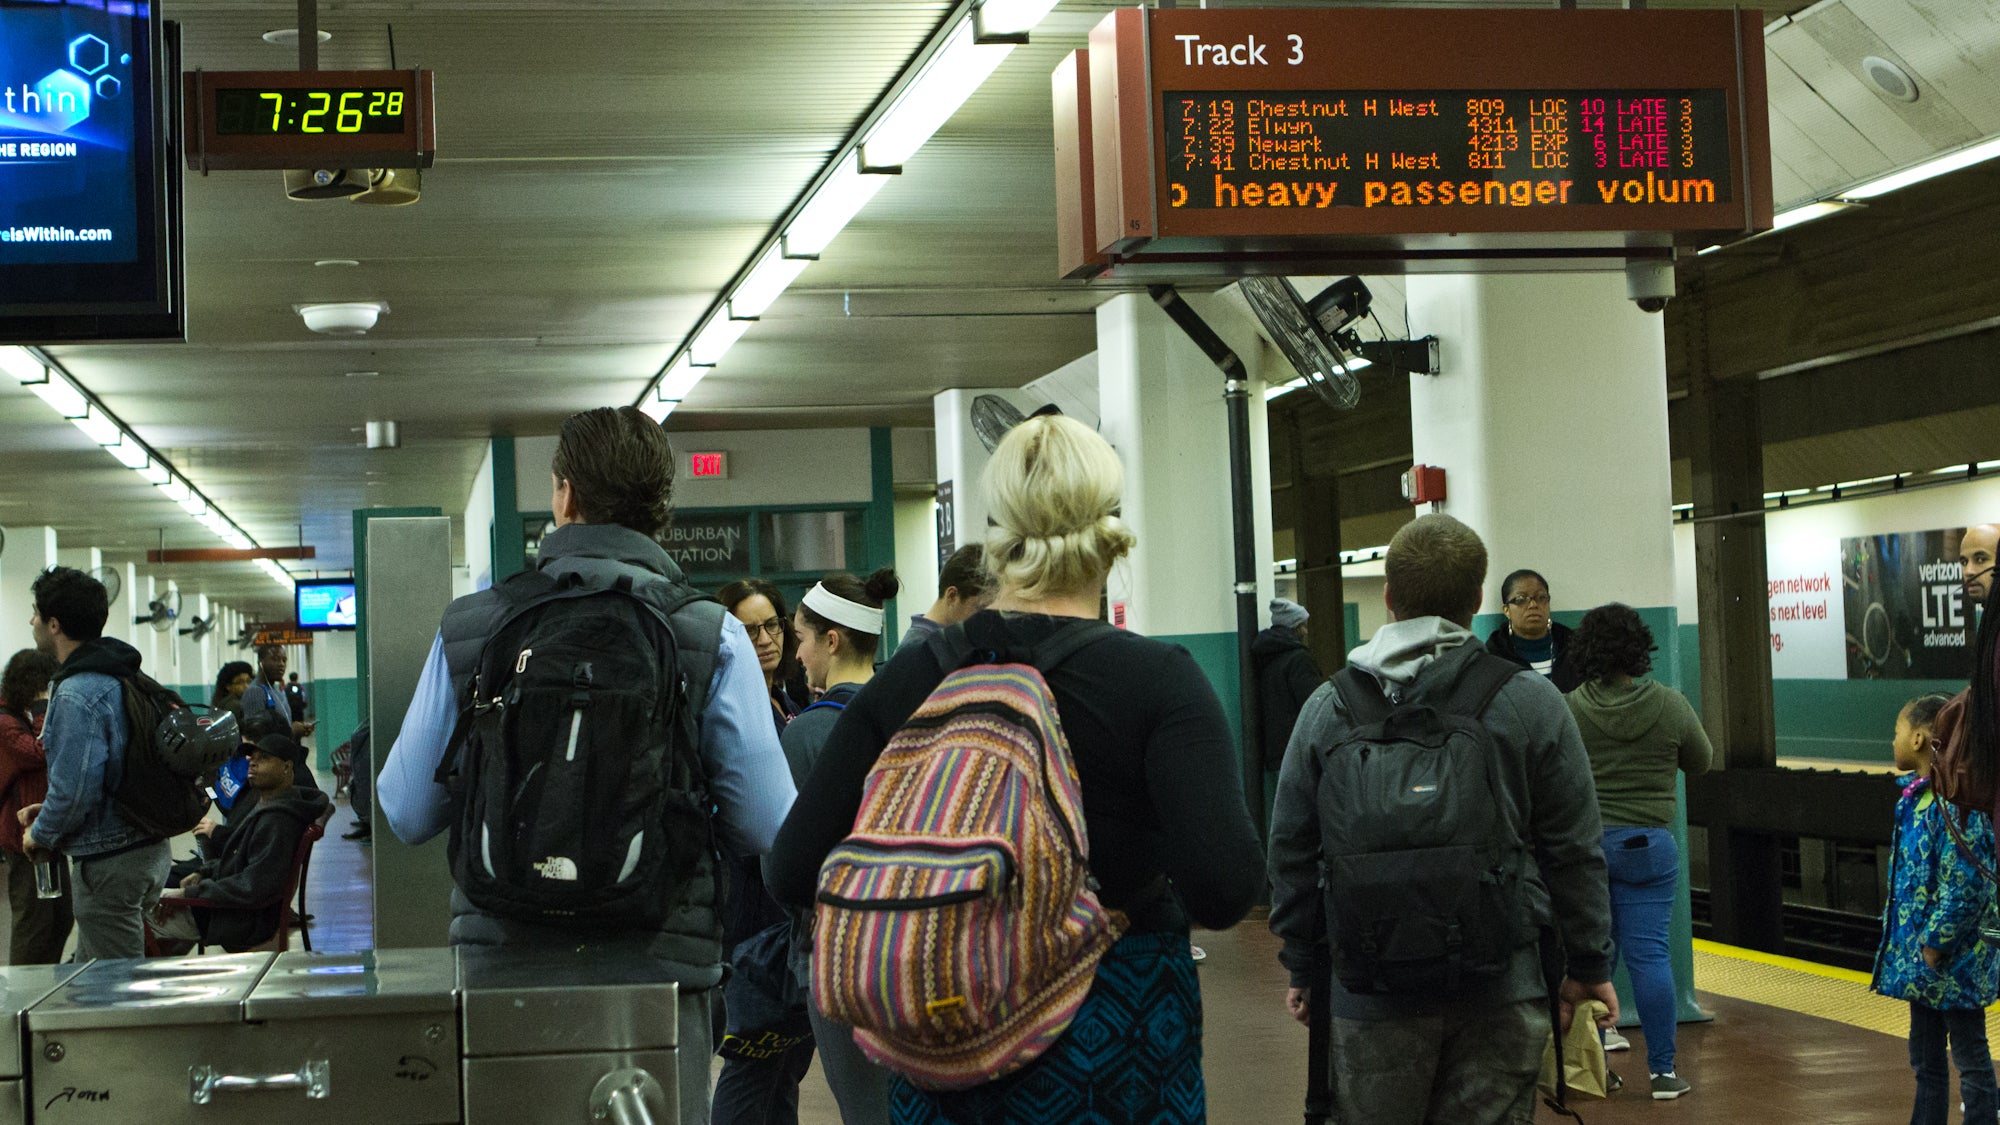 Commuters during SEPTA strike wait for slow Regional Rail trains | Kimberly Paynter / WHYY